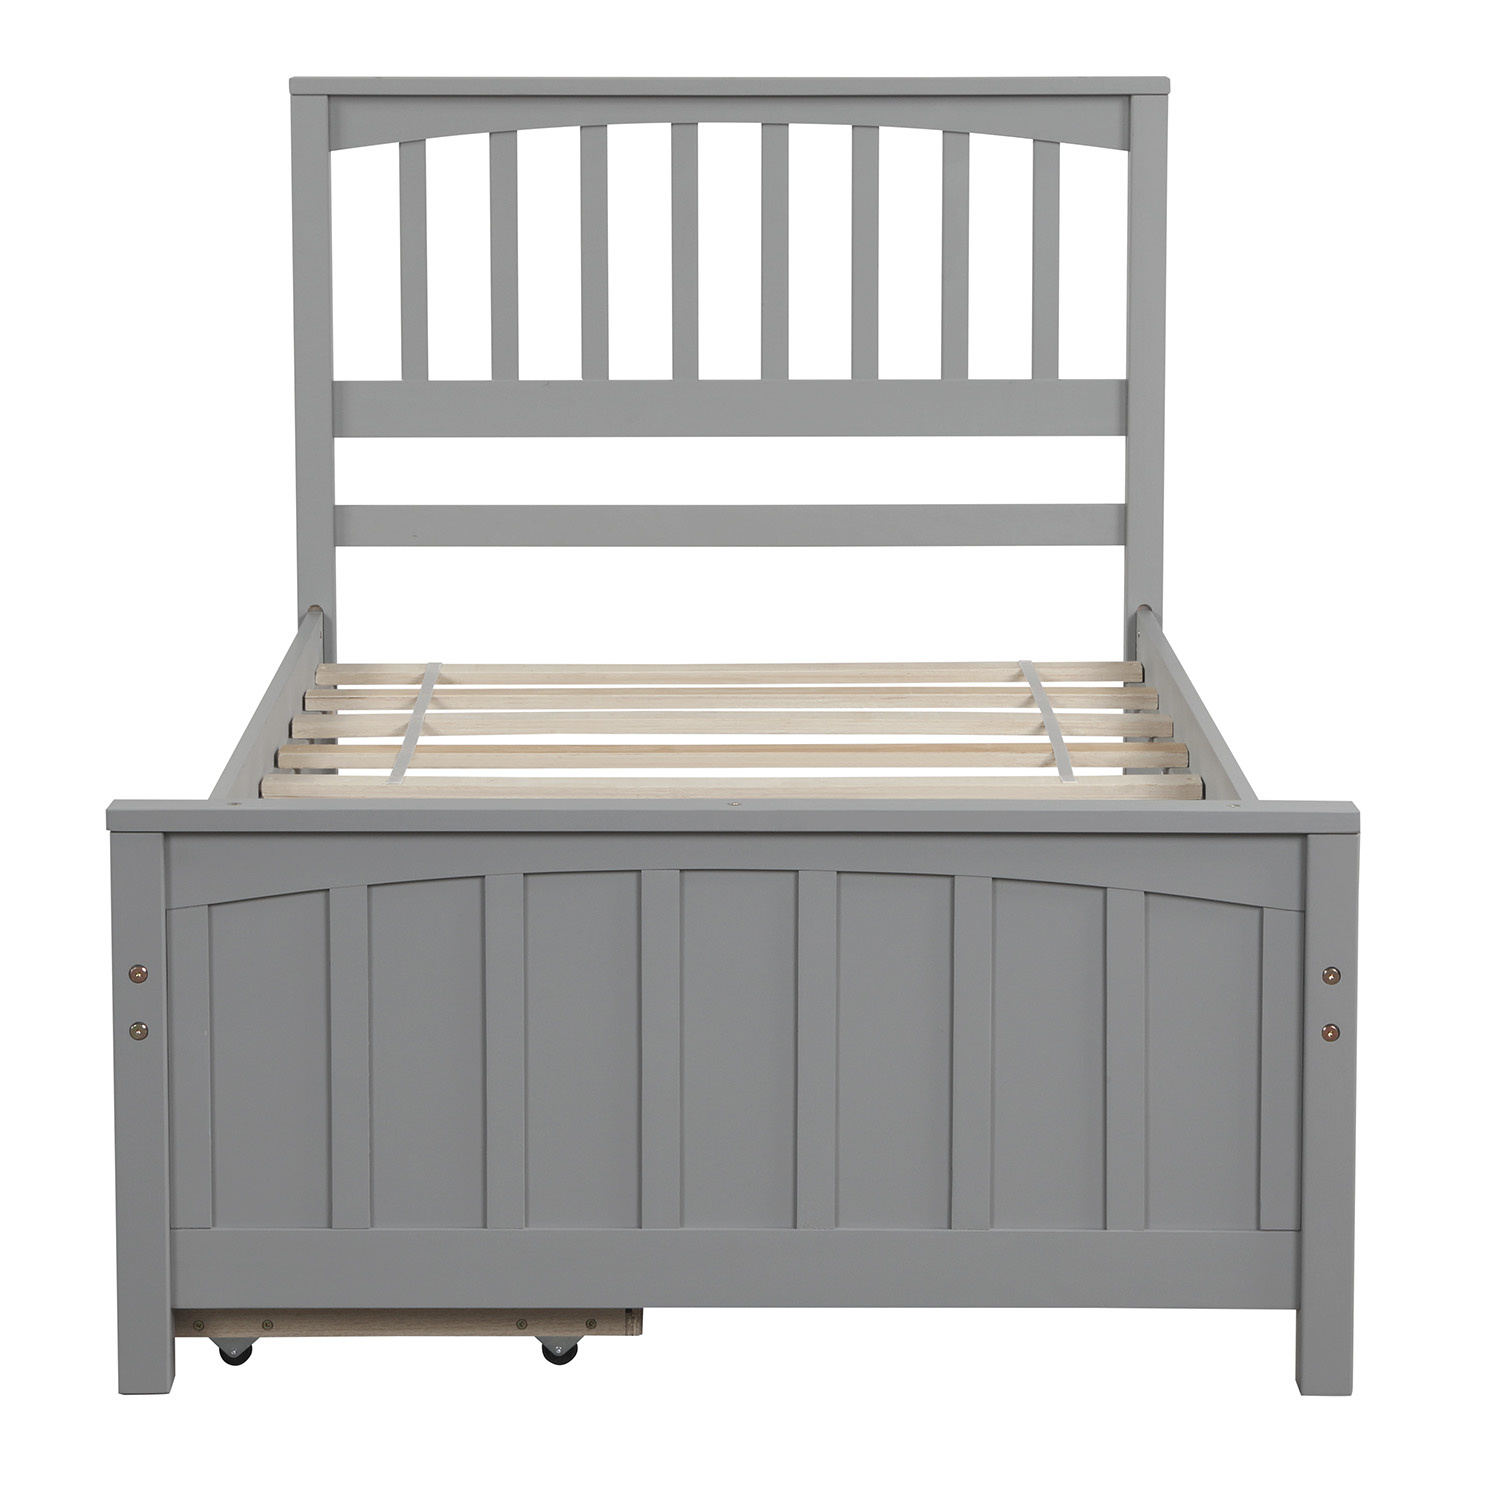 Twin Size Platform Bed with 2 Drawers, Classic Solid Wood Bed Frame with Headboard and Under-Bed Storage Space, for Kids Teens Adults Bedroom Furniture, No Box Spring Need, Grey - image 2 of 6